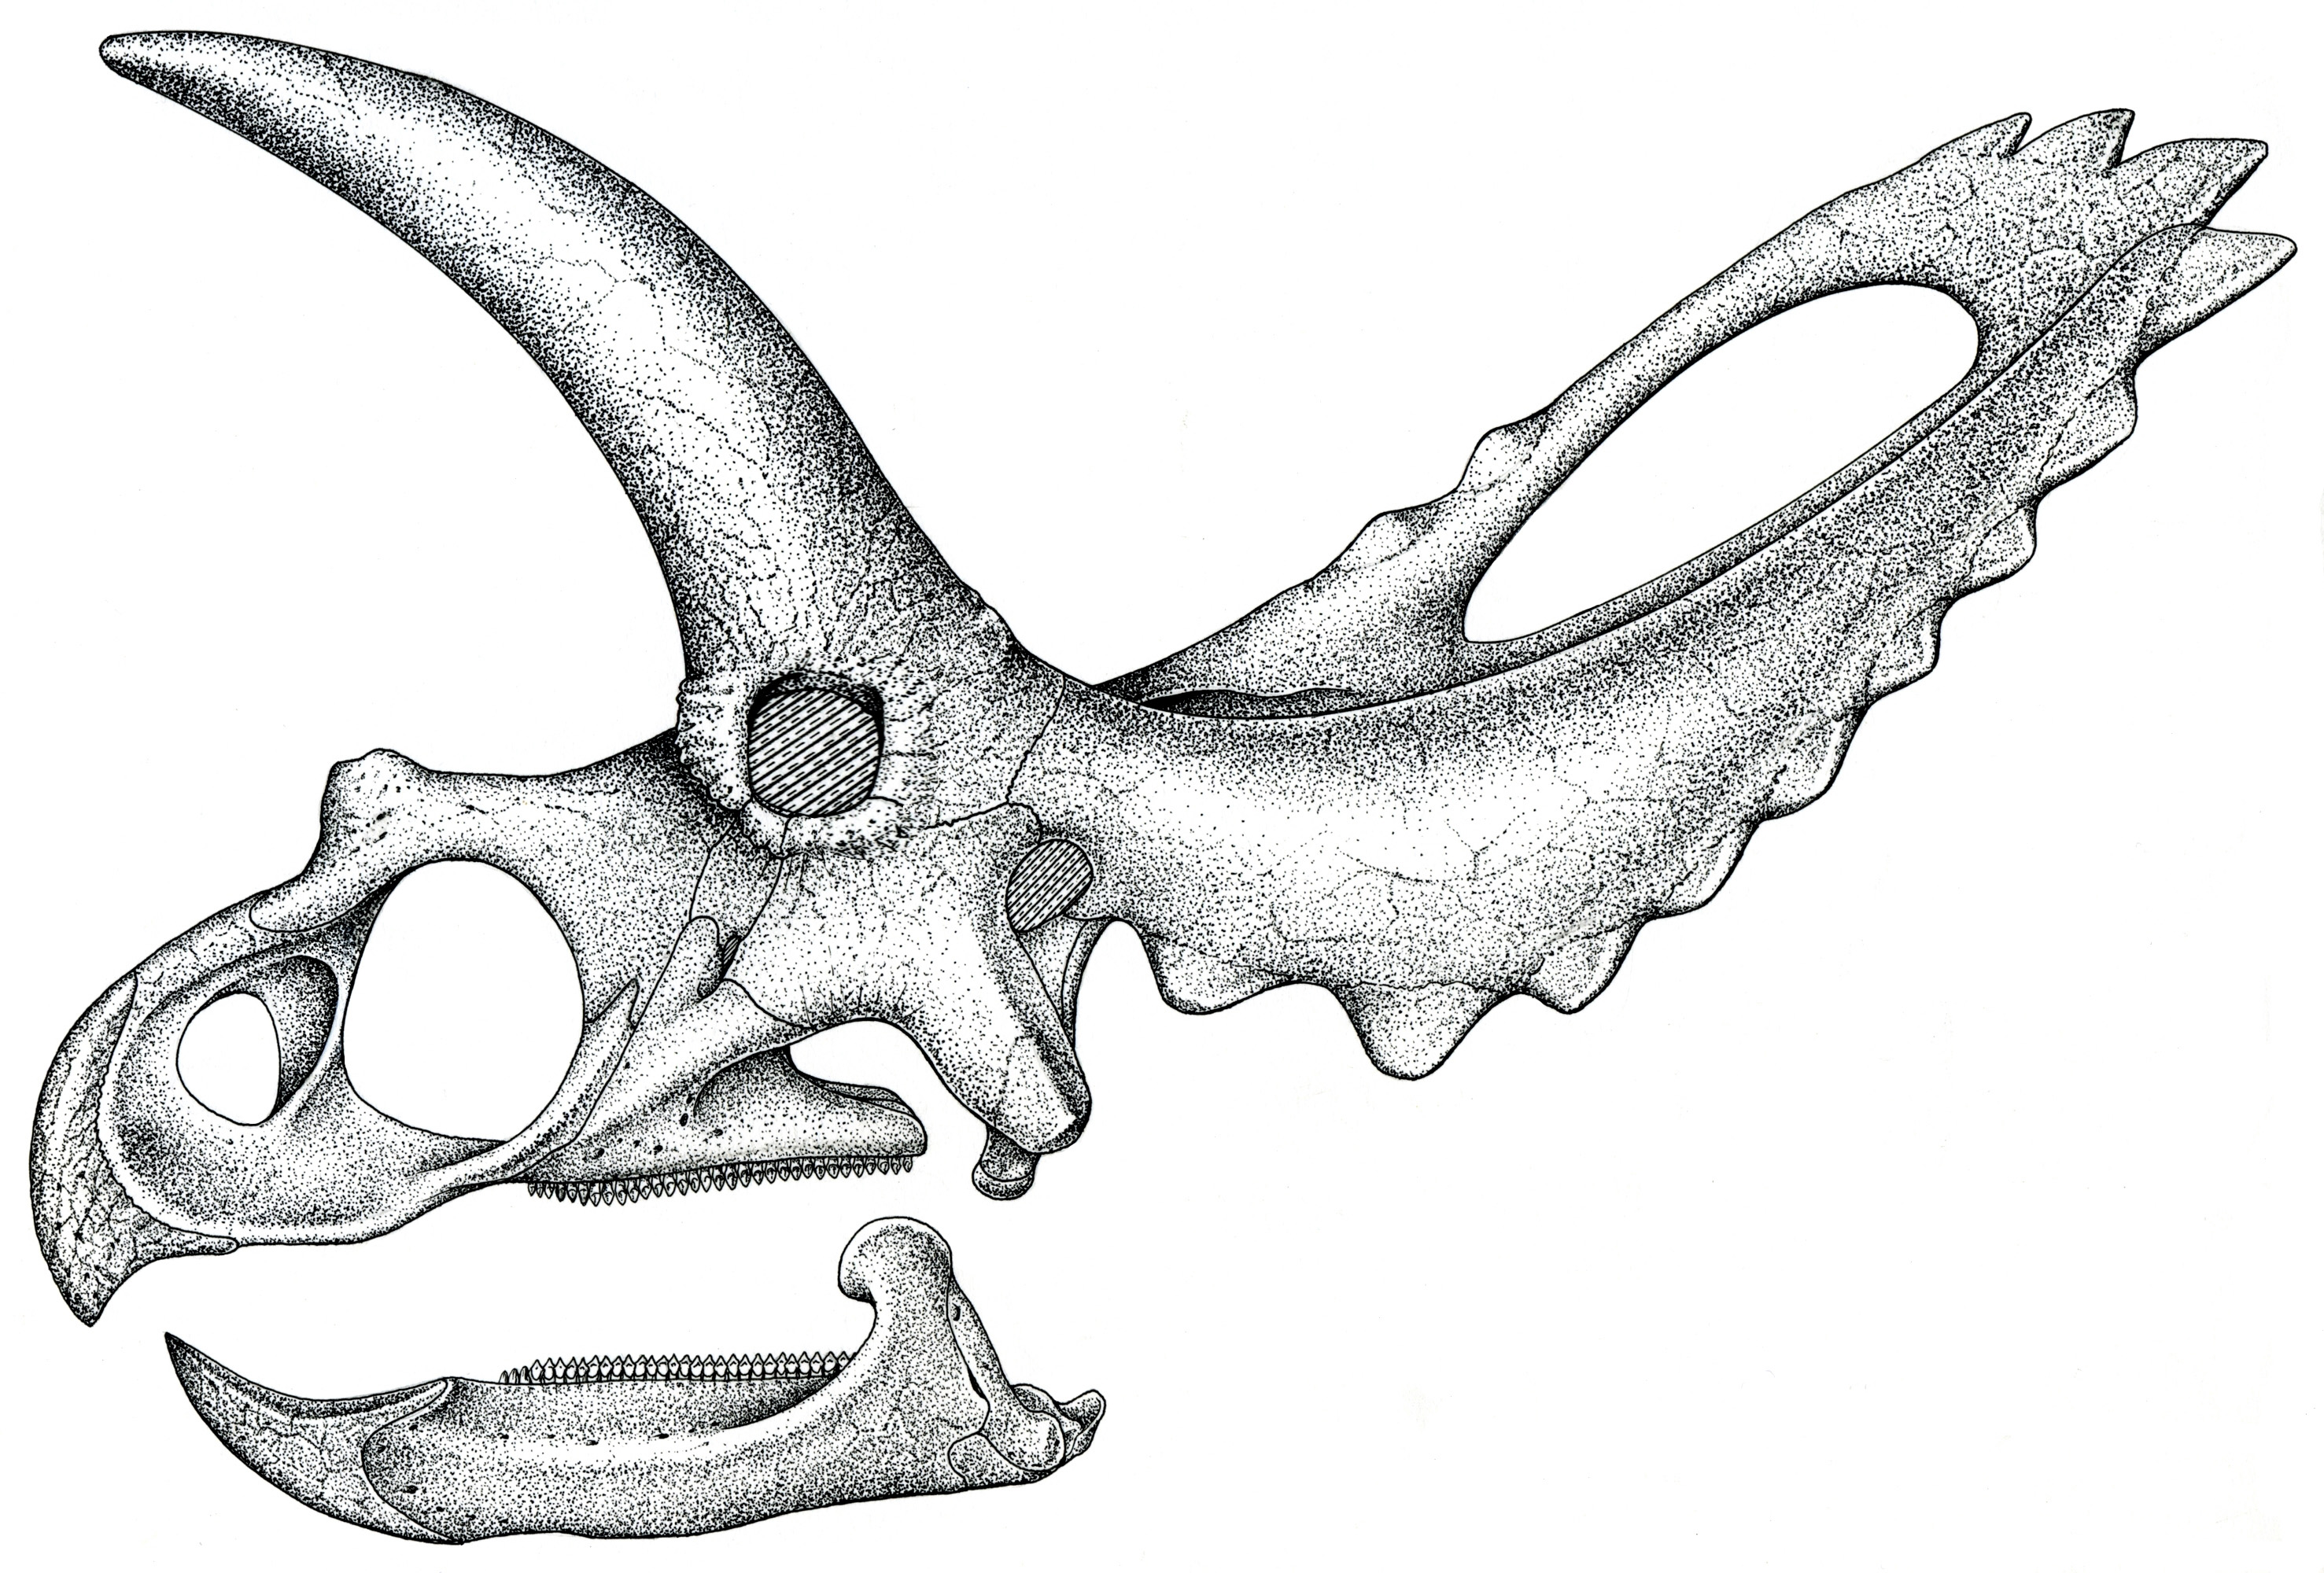 Dinosaur Skull Drawing Images & Pictures - Becuo